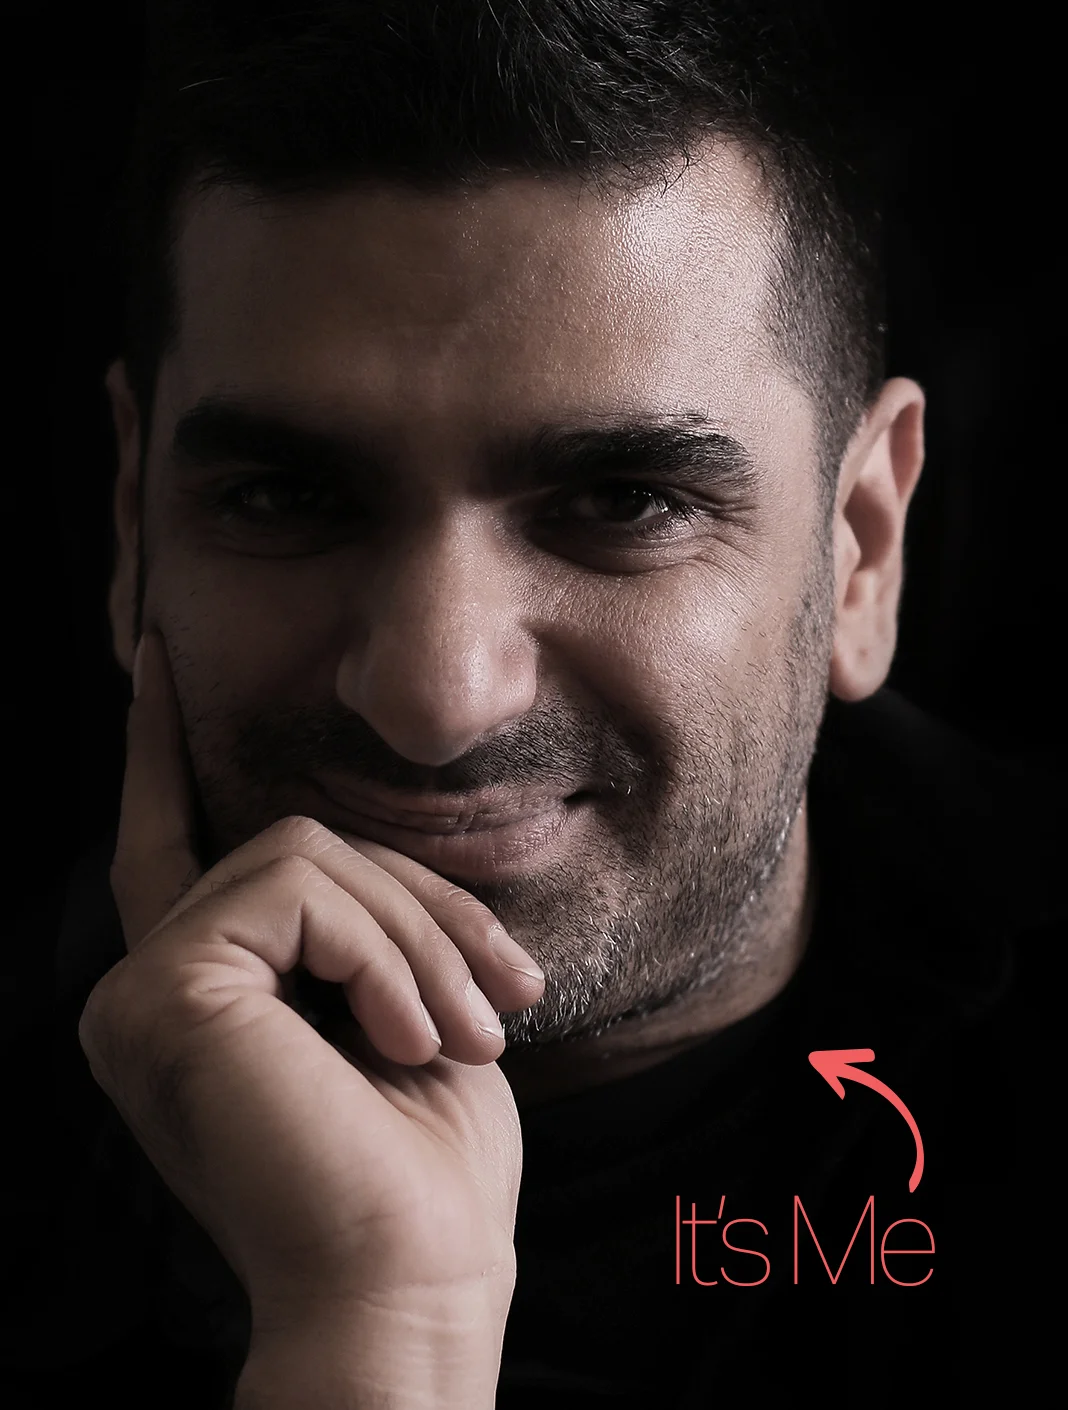 my image in black background appears when hover on Ahad Amiri text